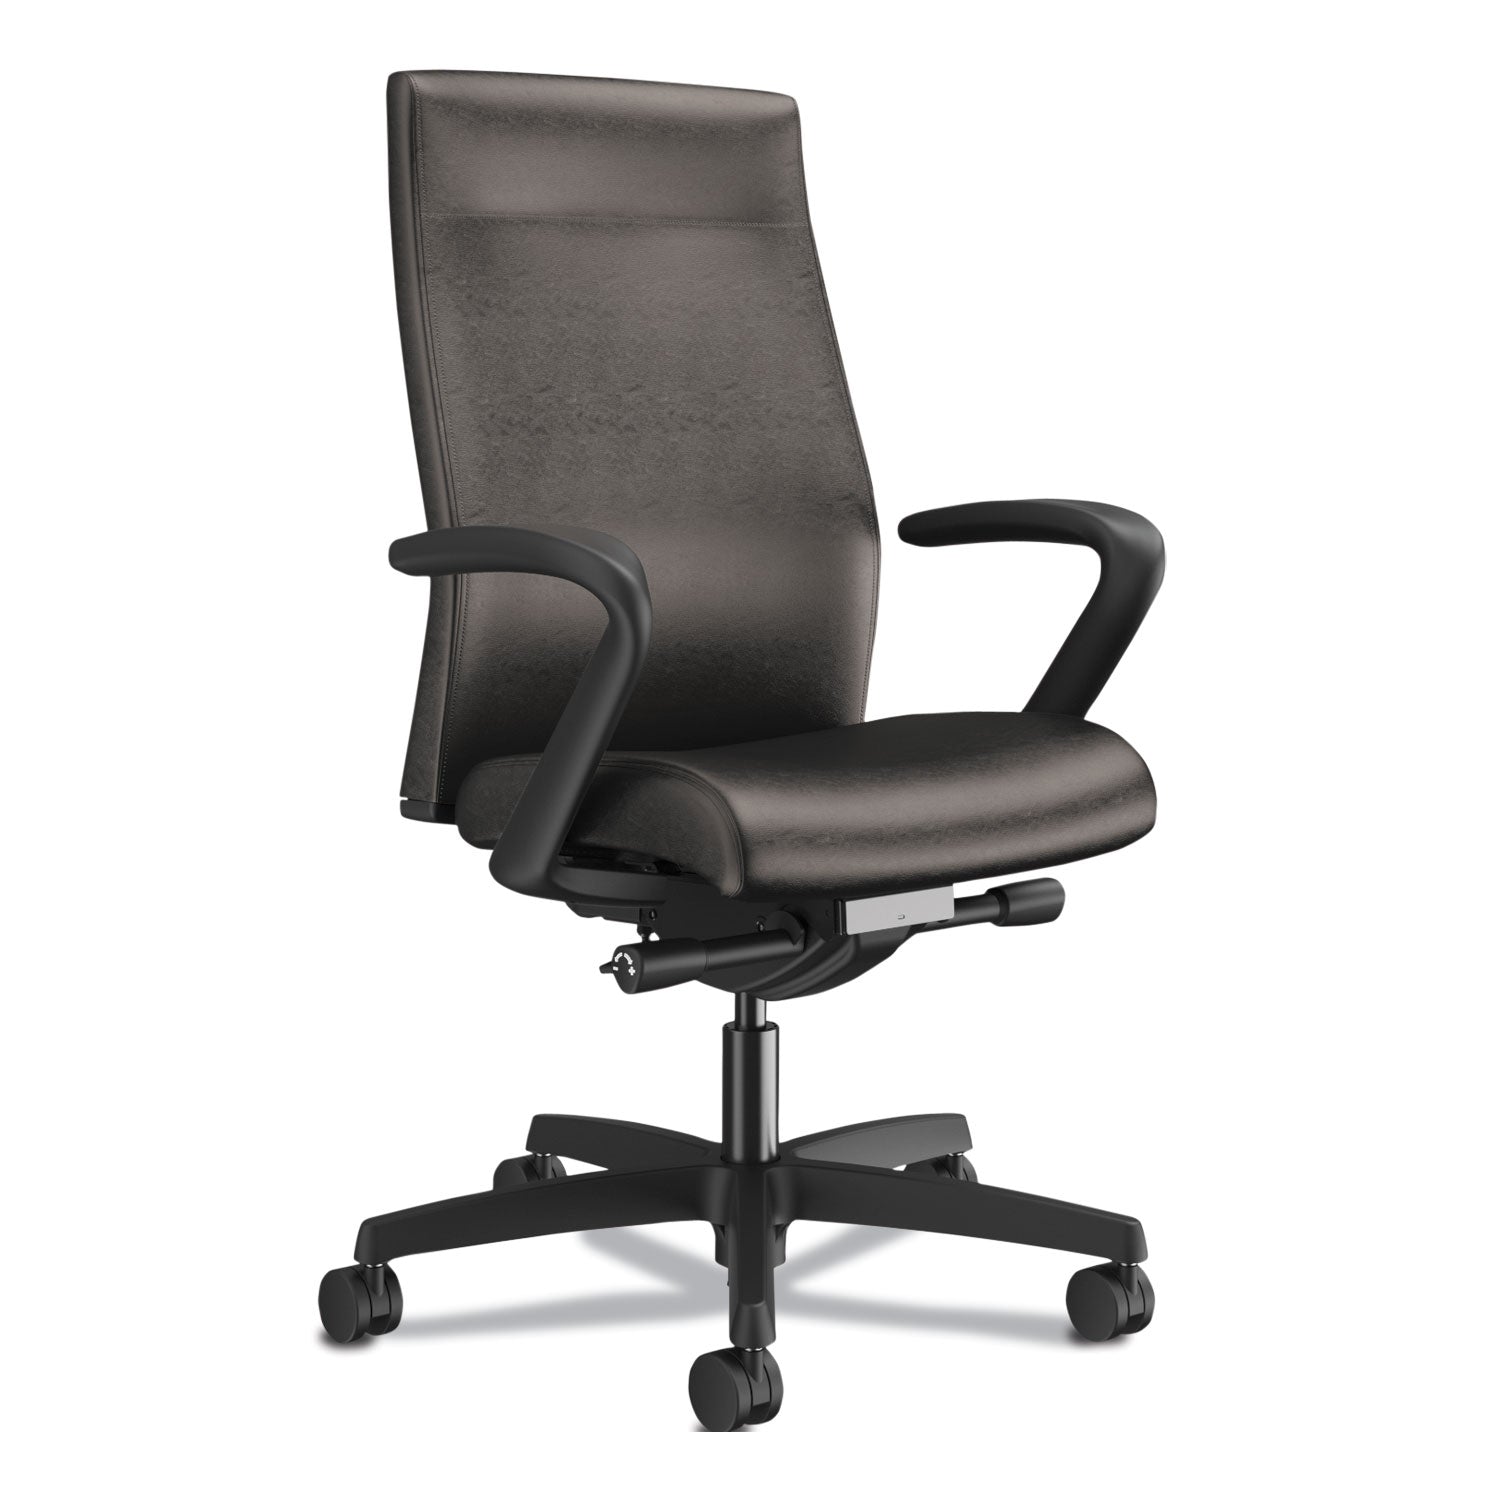 ignition-20-upholstered-mid-back-task-chair-17-to-22-seat-height-black-fabric-seat-back-black-base_honi2ul2fu10tk - 1